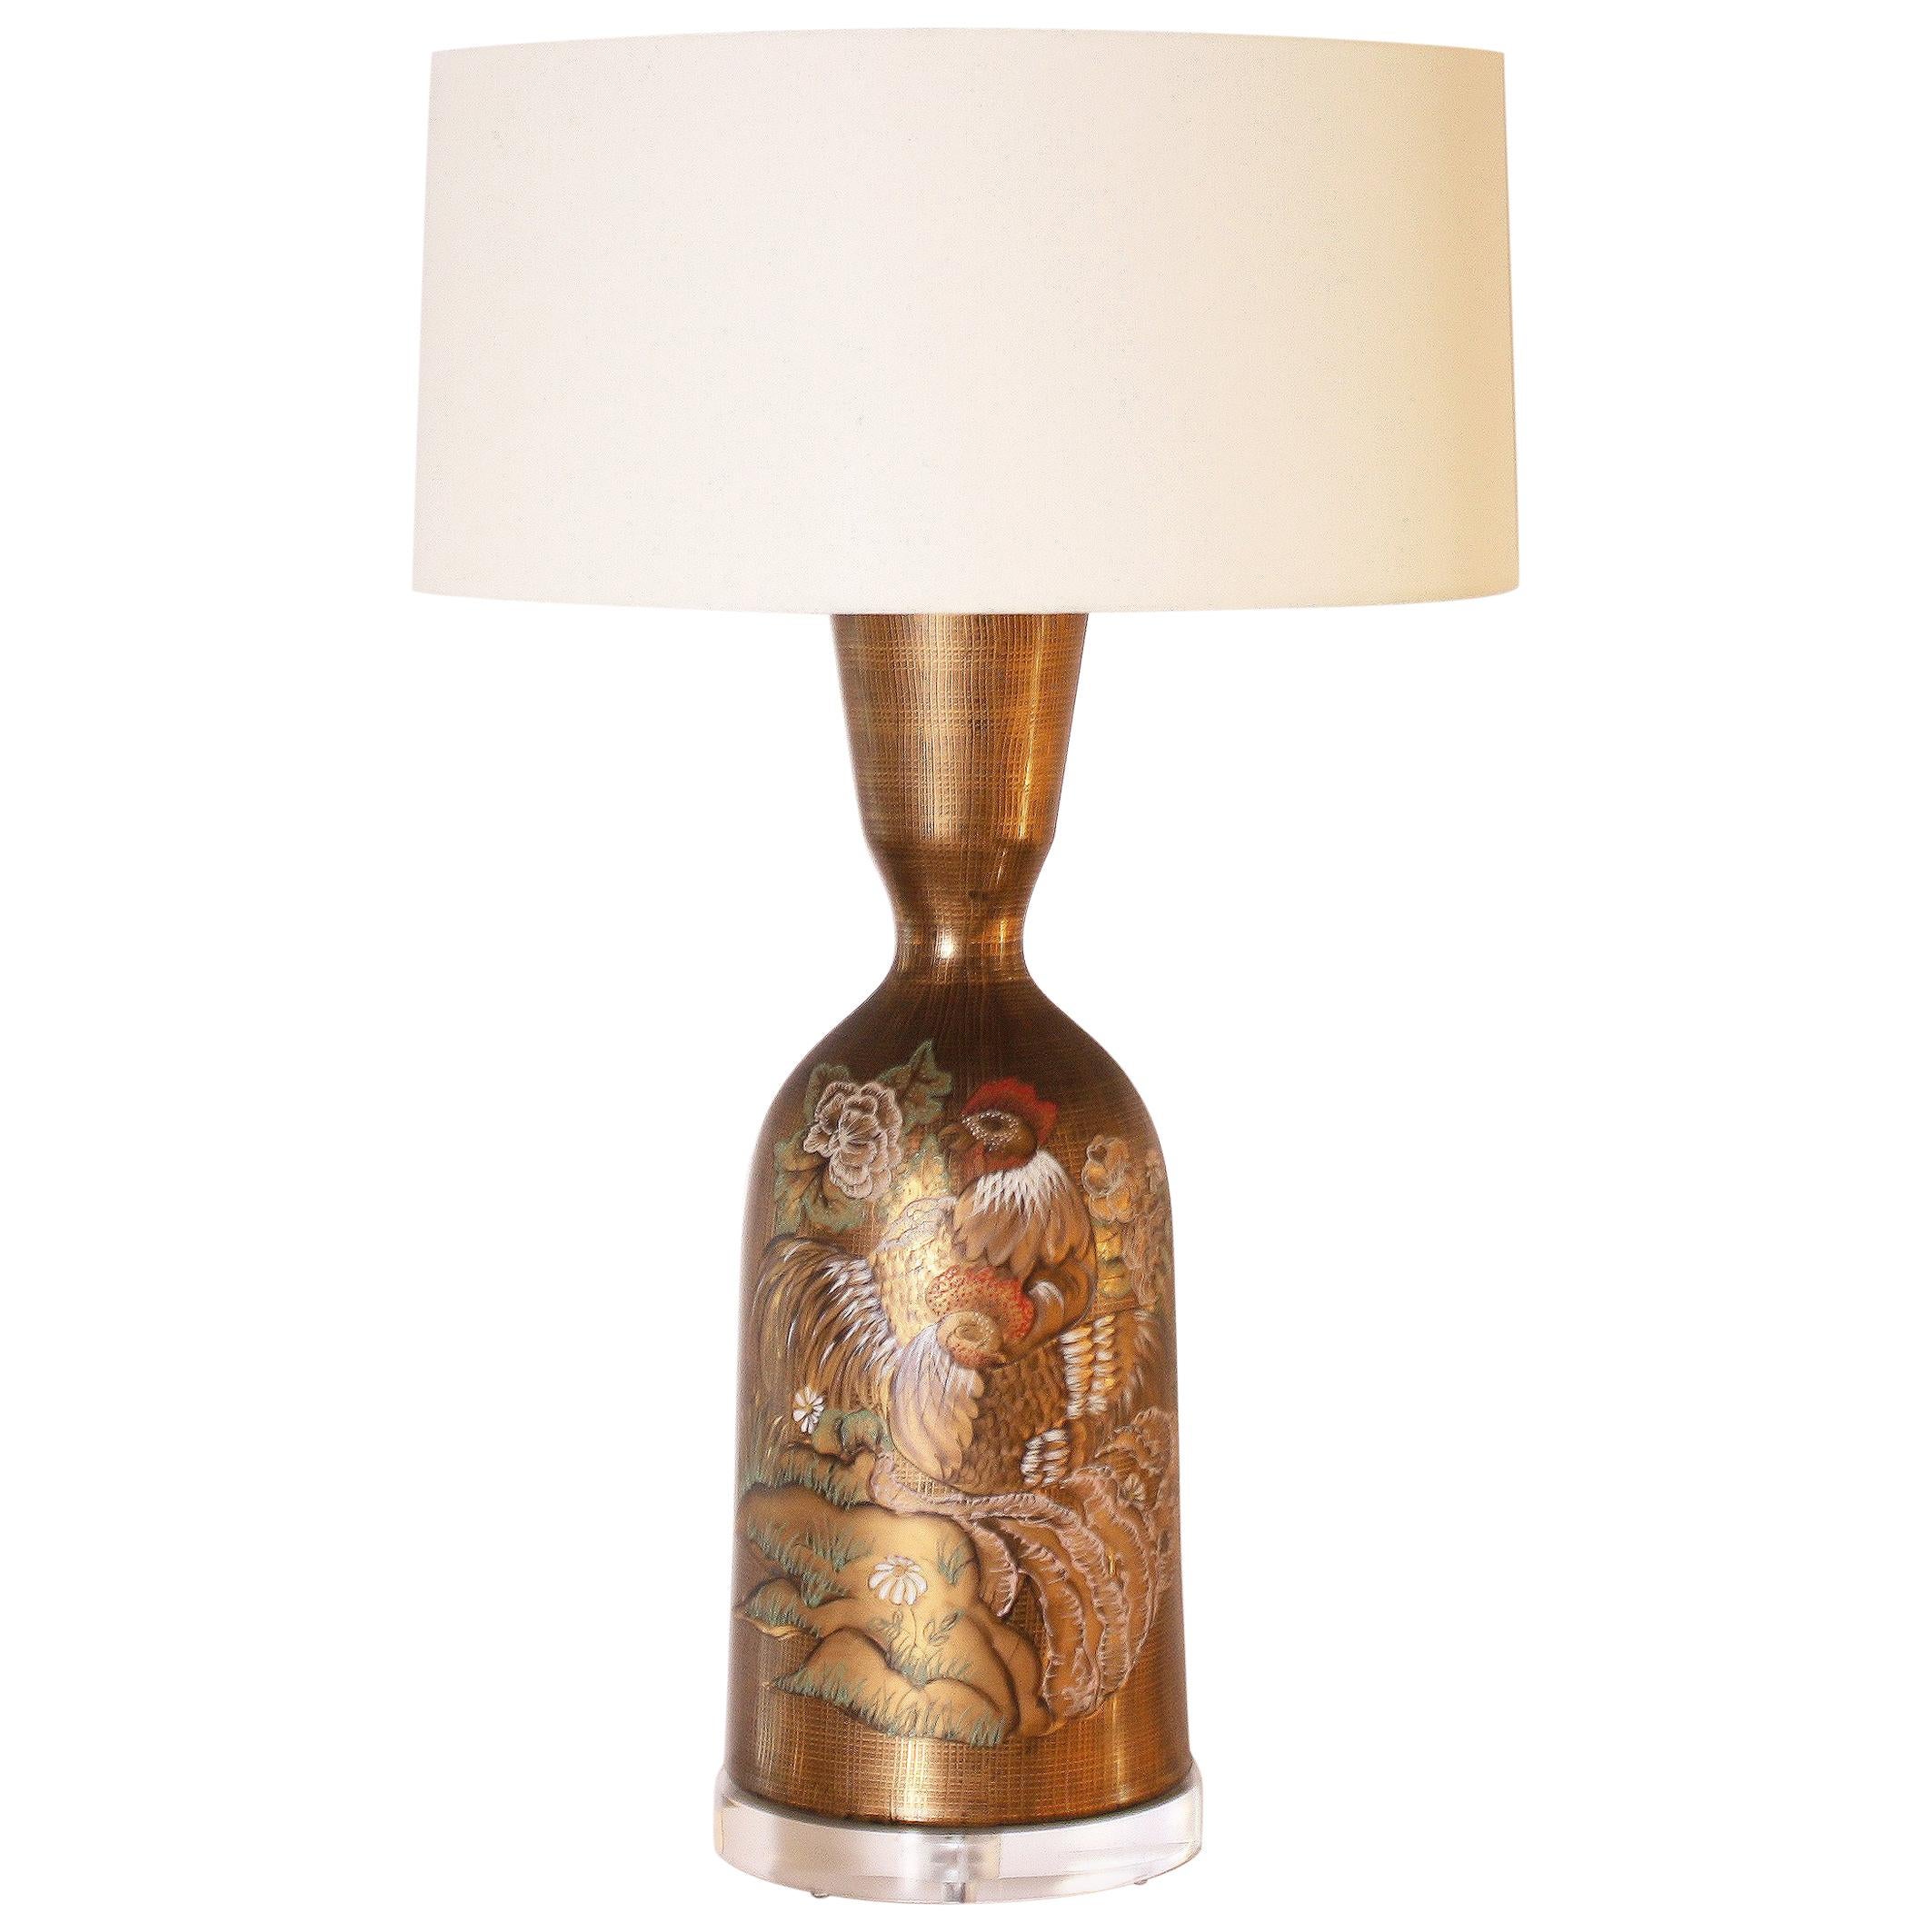 Gold Marbro Styled Lamp with Hand-Painted Rooster, circa 1960